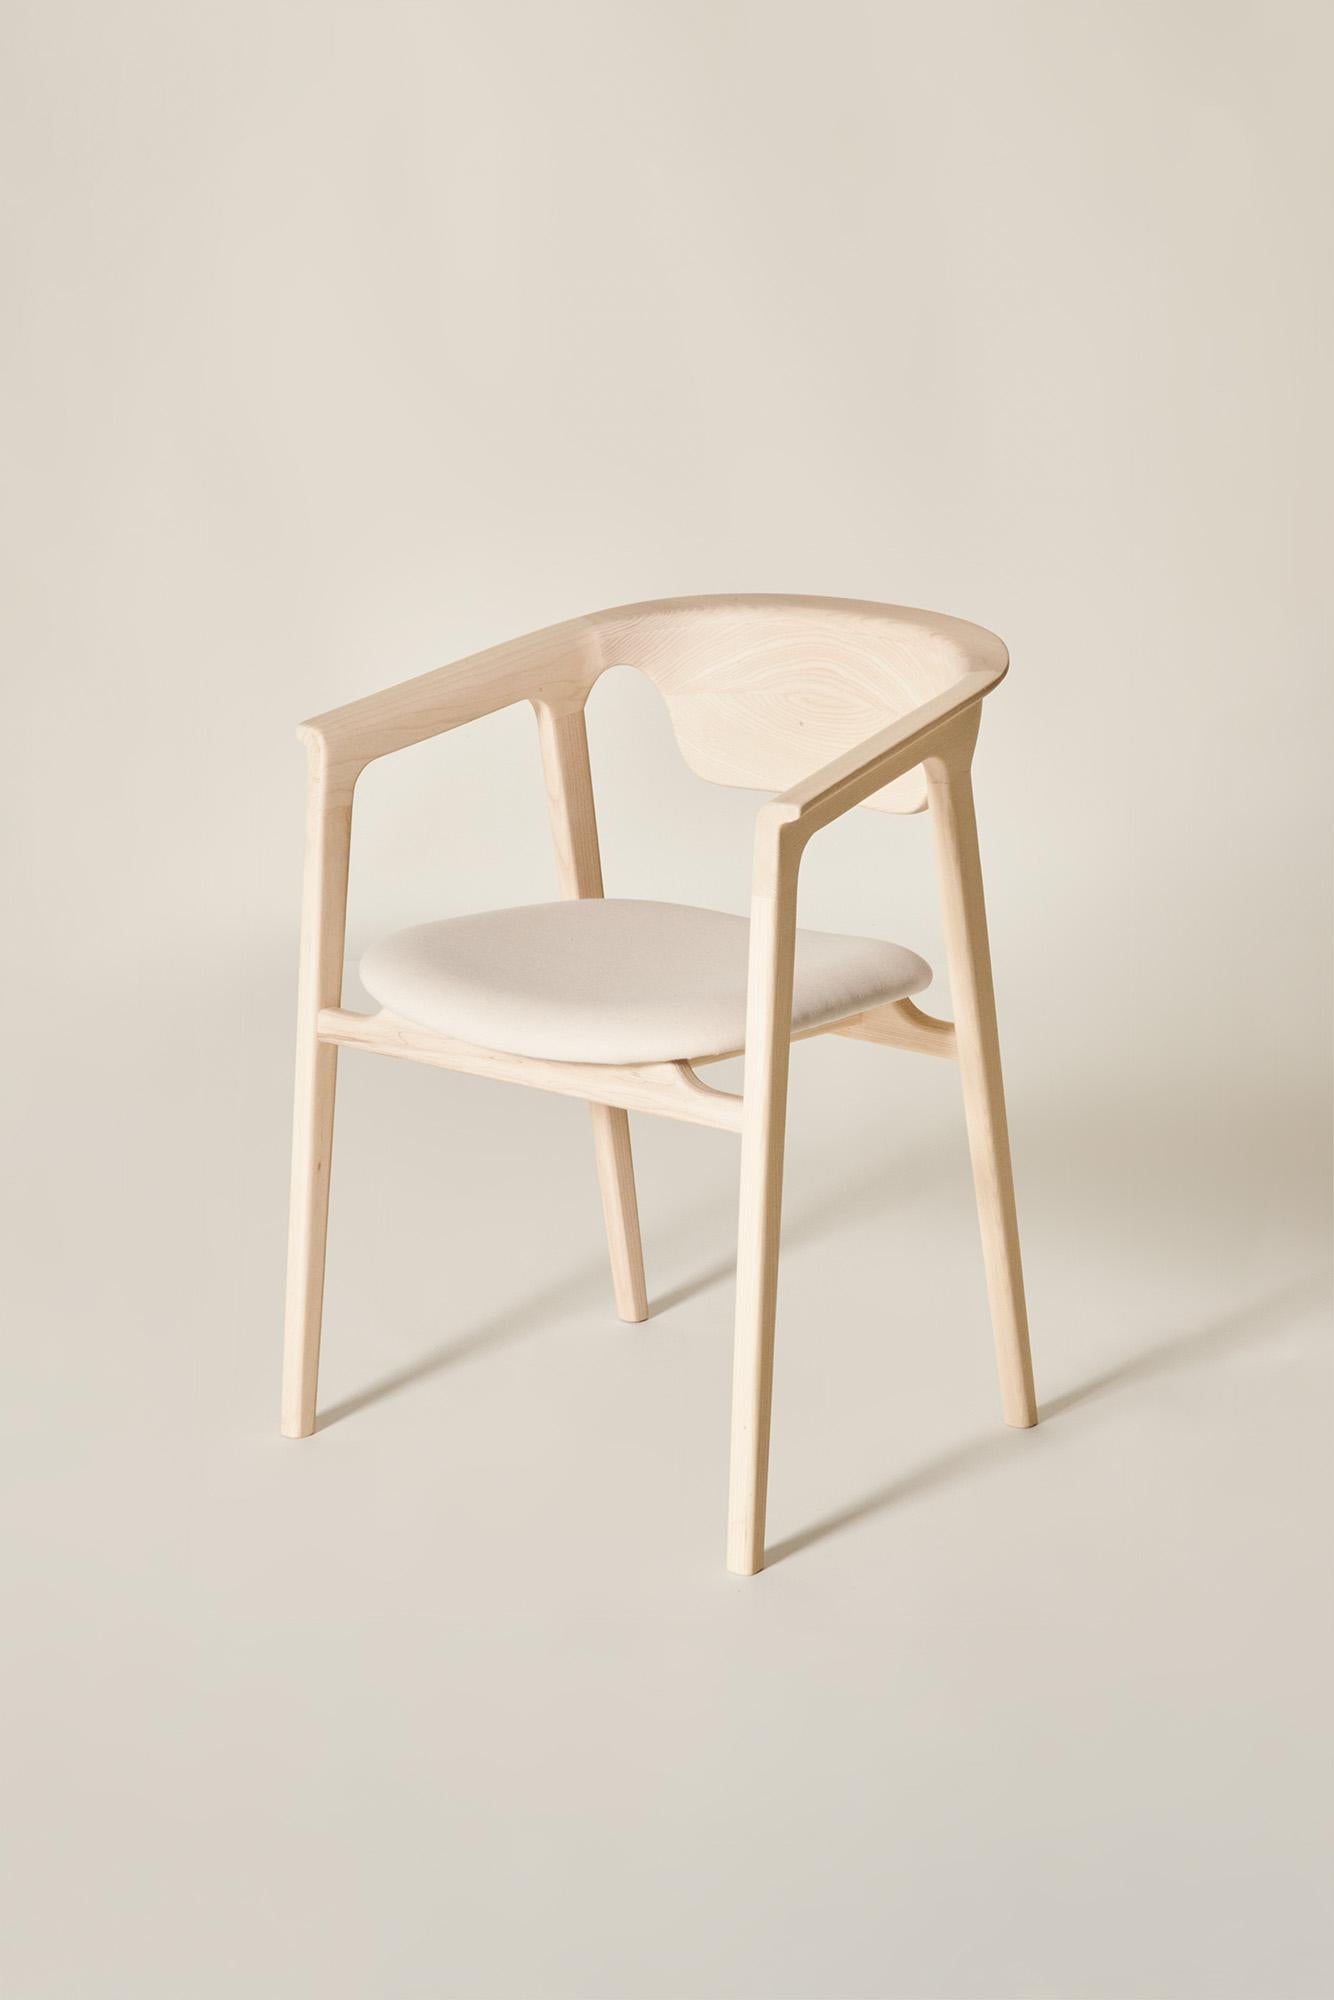 Duna Solid Wood Chair, Ash in Handmade Natural Finish, Contemporary For Sale 8